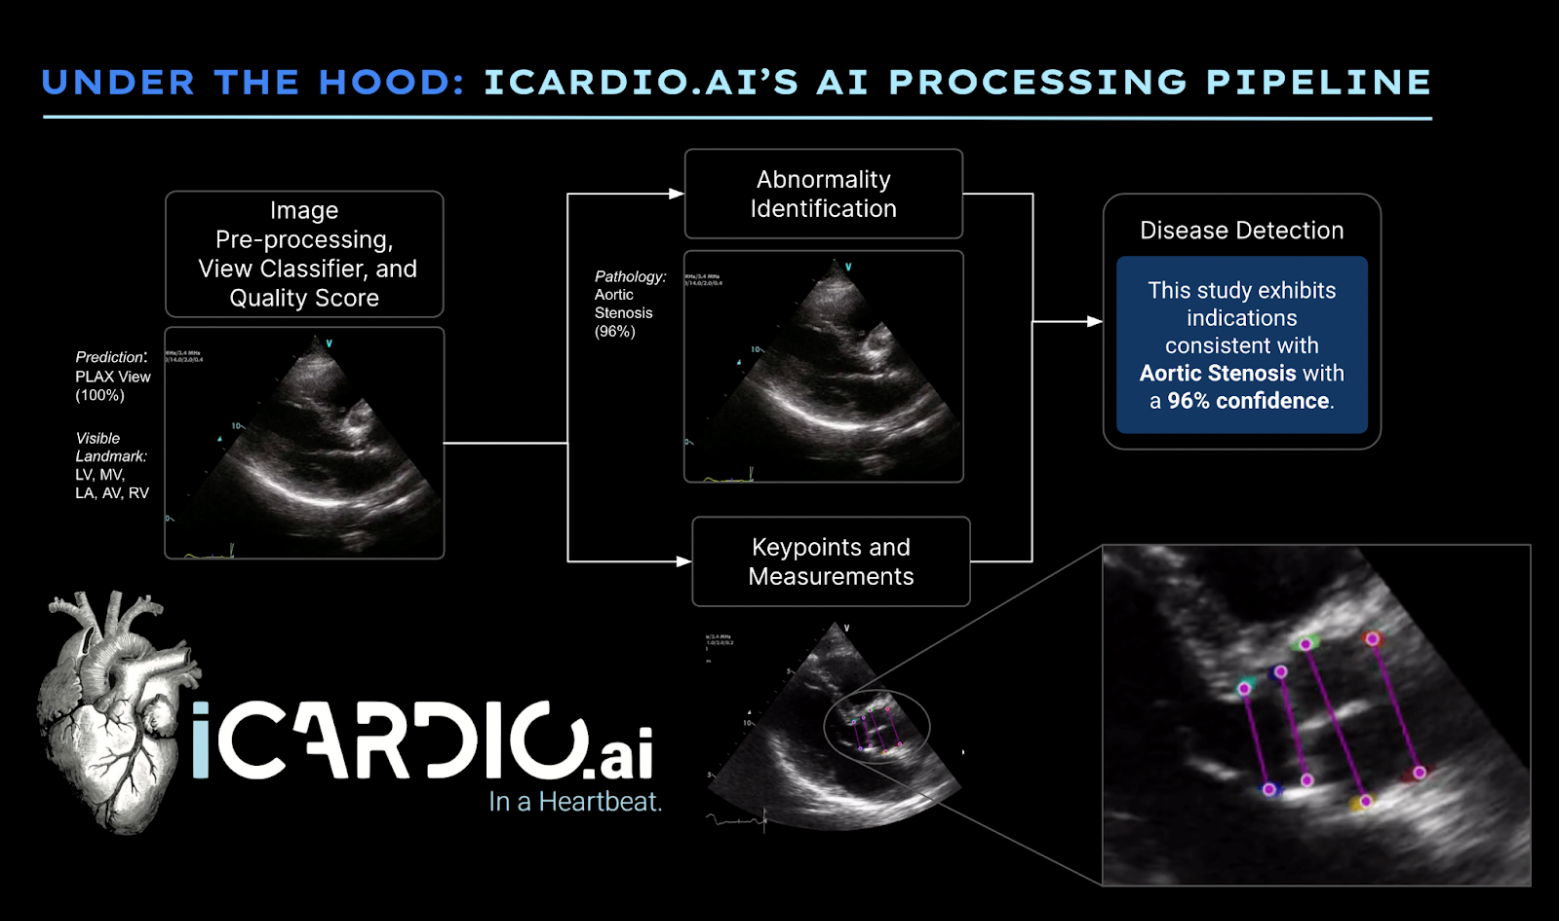 A diagram of the iCardio AI processing pipeline showing flow from image preprocessing to abnormality identification and measurements to output of disease detection.